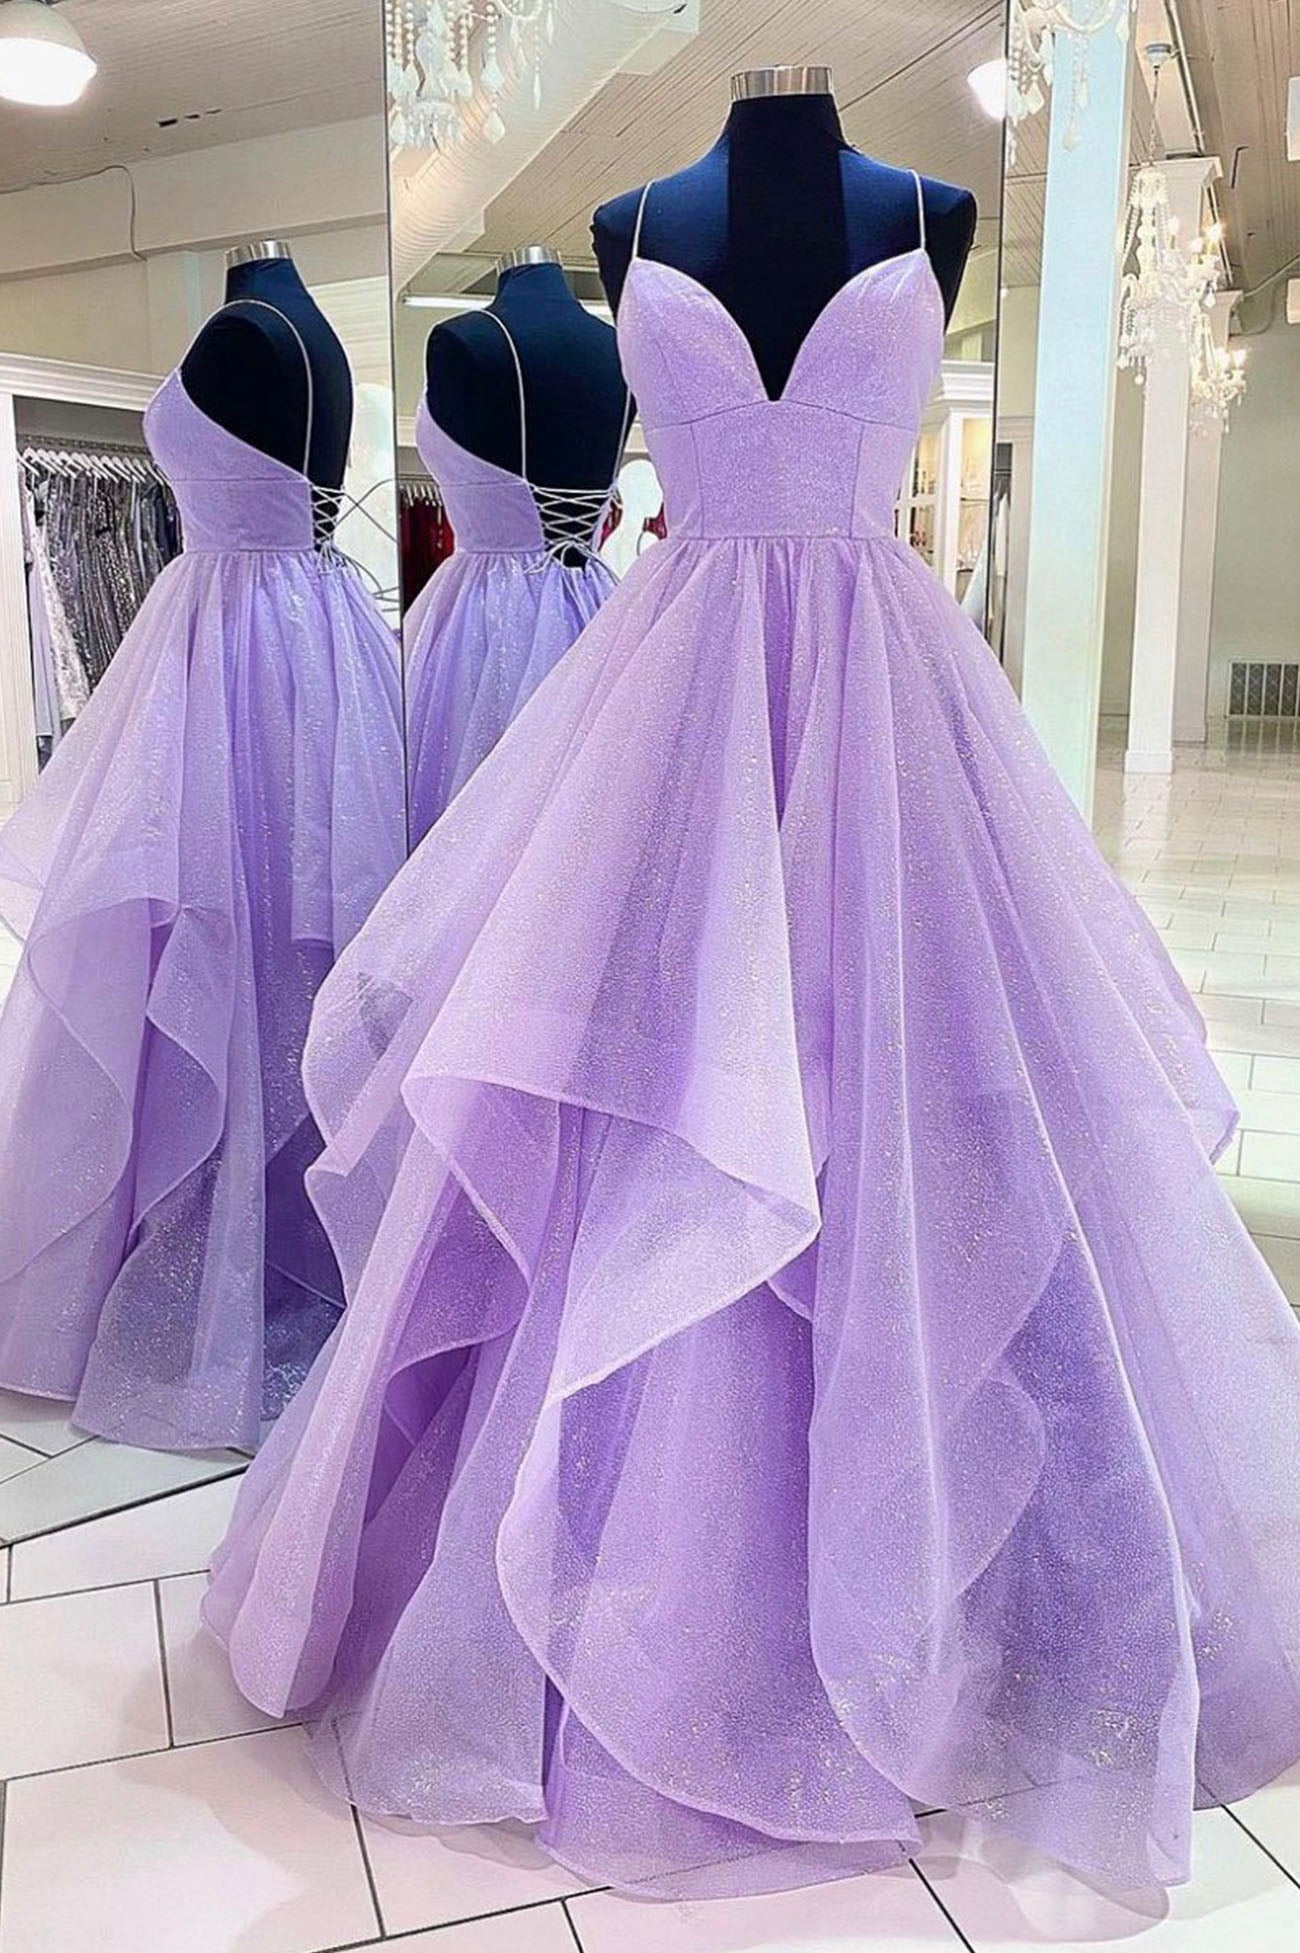 Prom Dresses For Skinny Body, Purple Tulle Long A-Line Prom Dress, Spaghetti Strap Formal Evening Dress